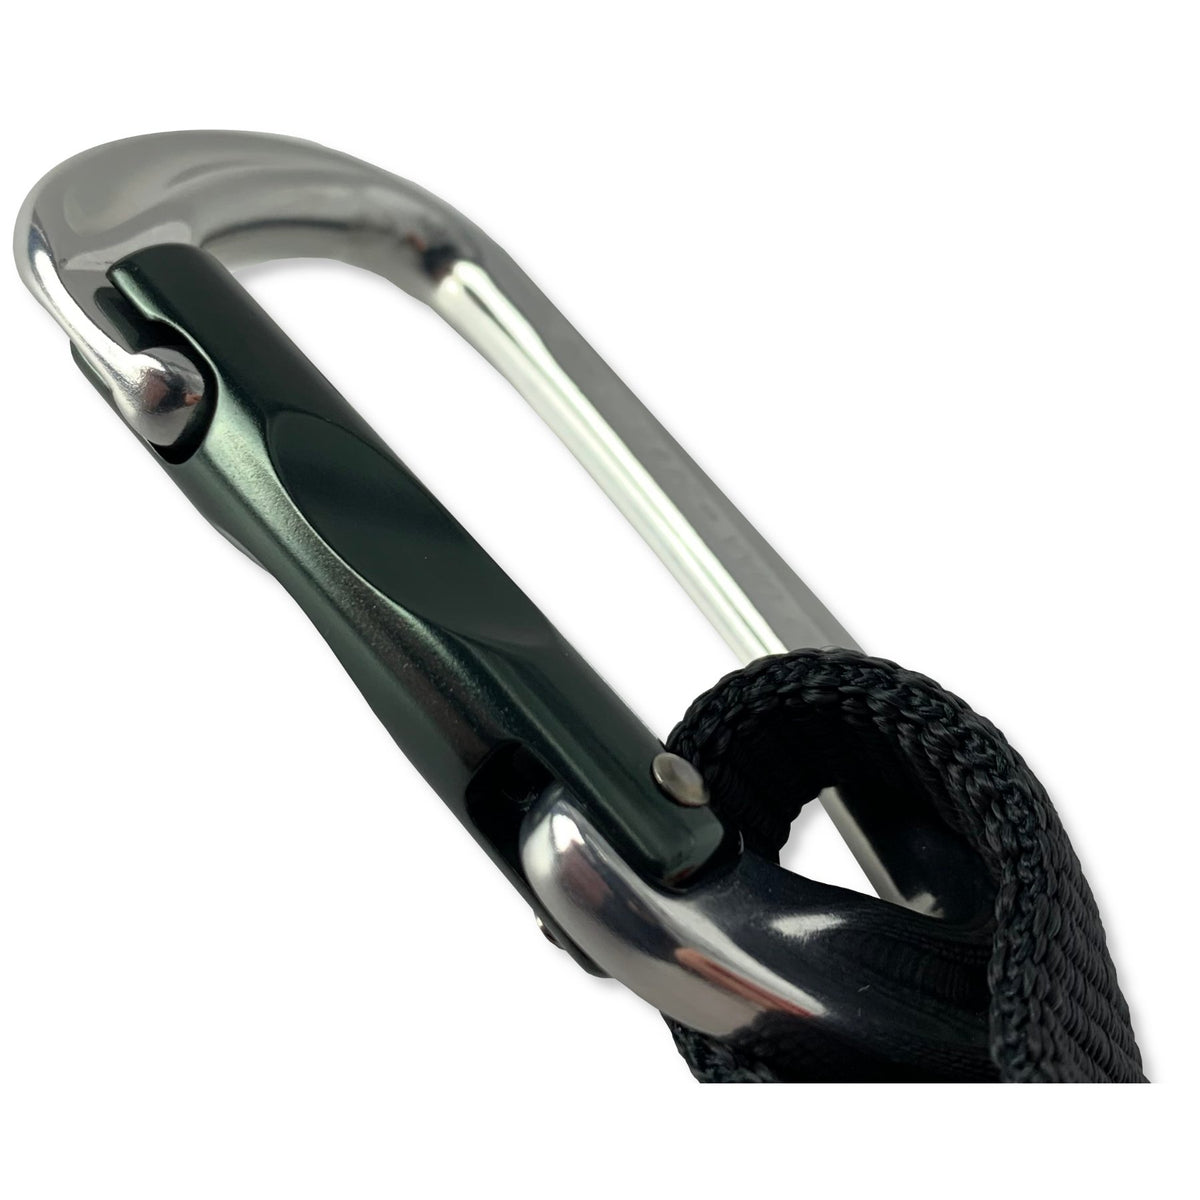 Fixe Orion F Straight Gate Carabiner close up of gate